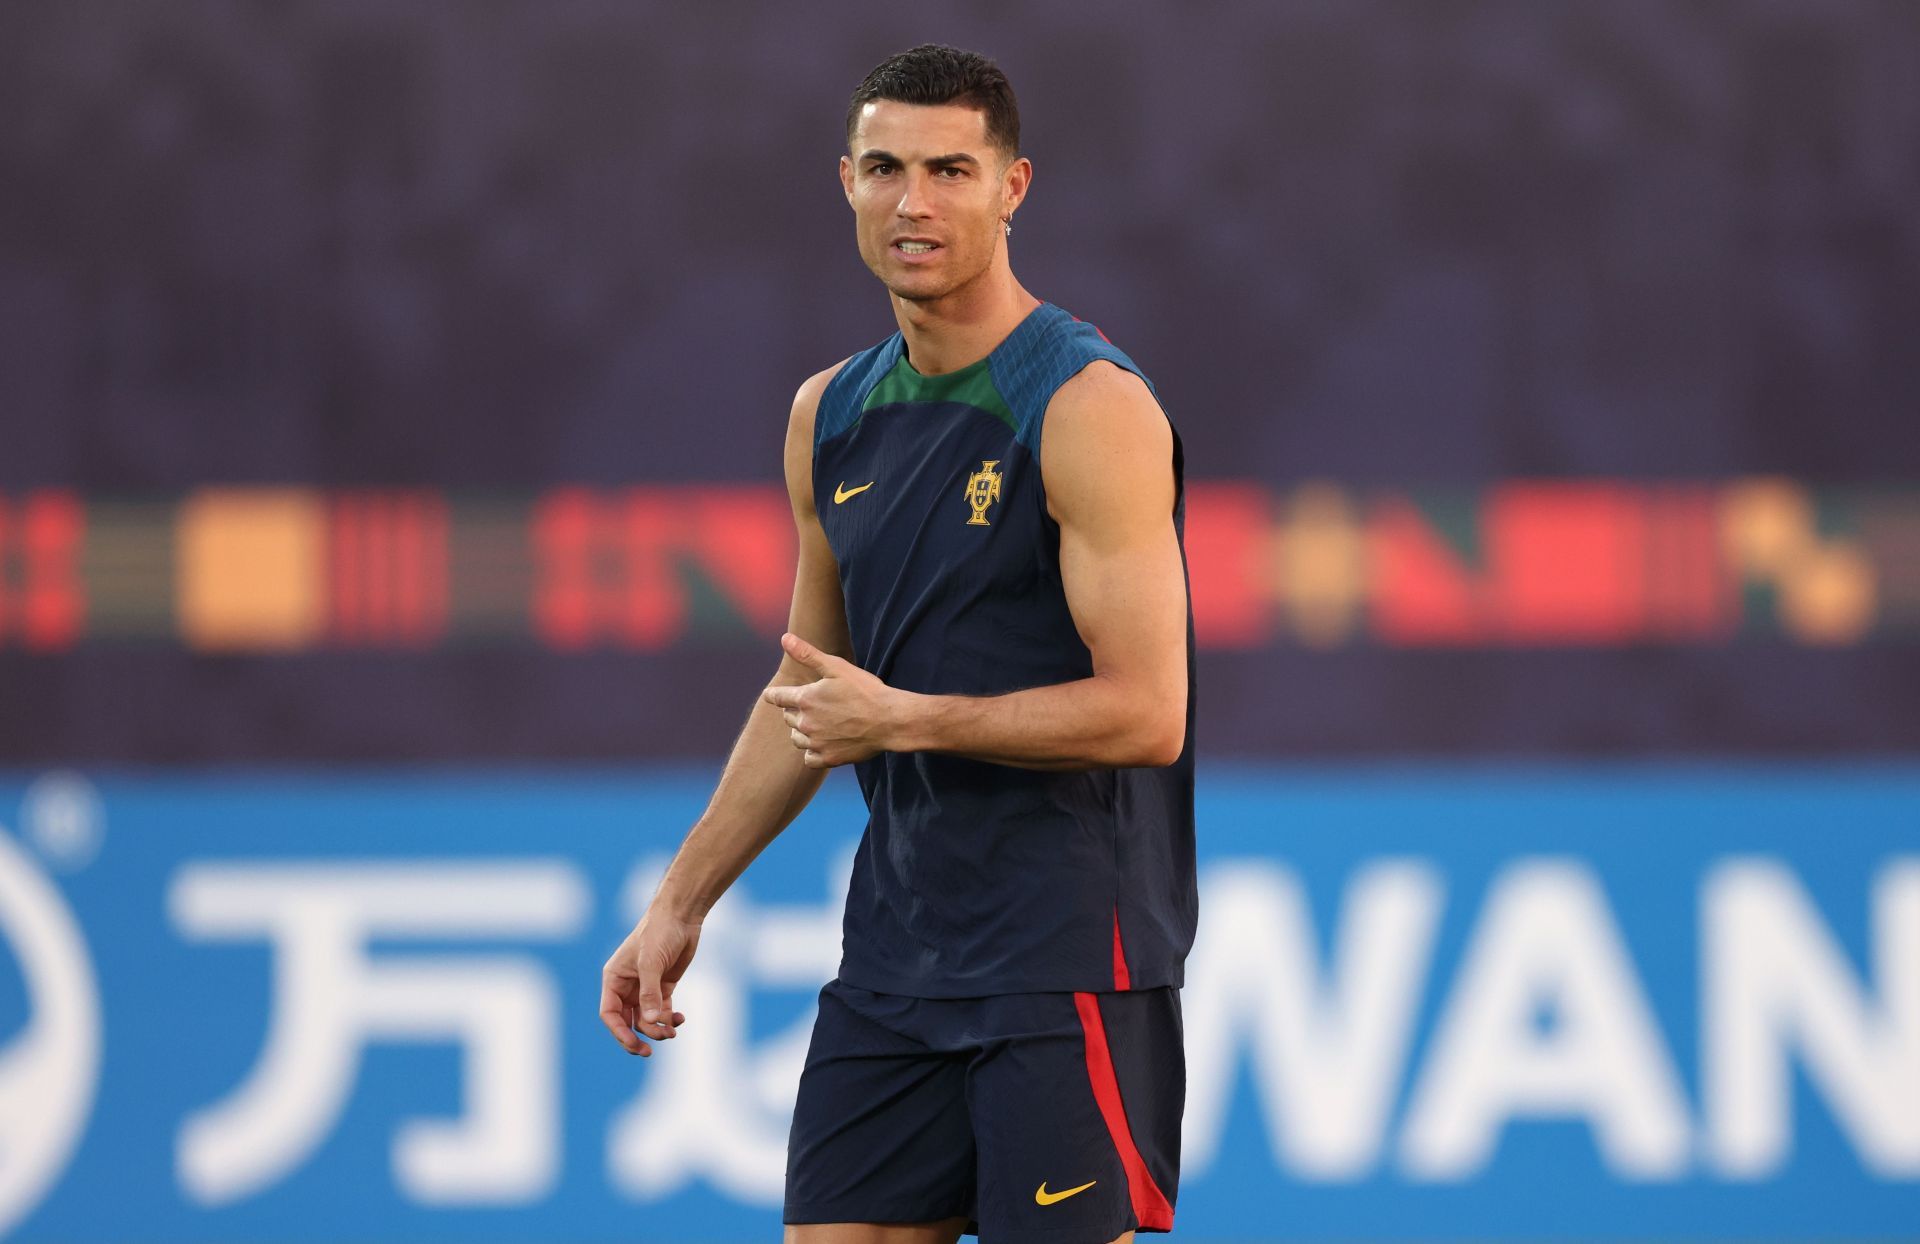 Cristiano Ronaldo is playing for Portugal at the 2022 FIFA World Cup.